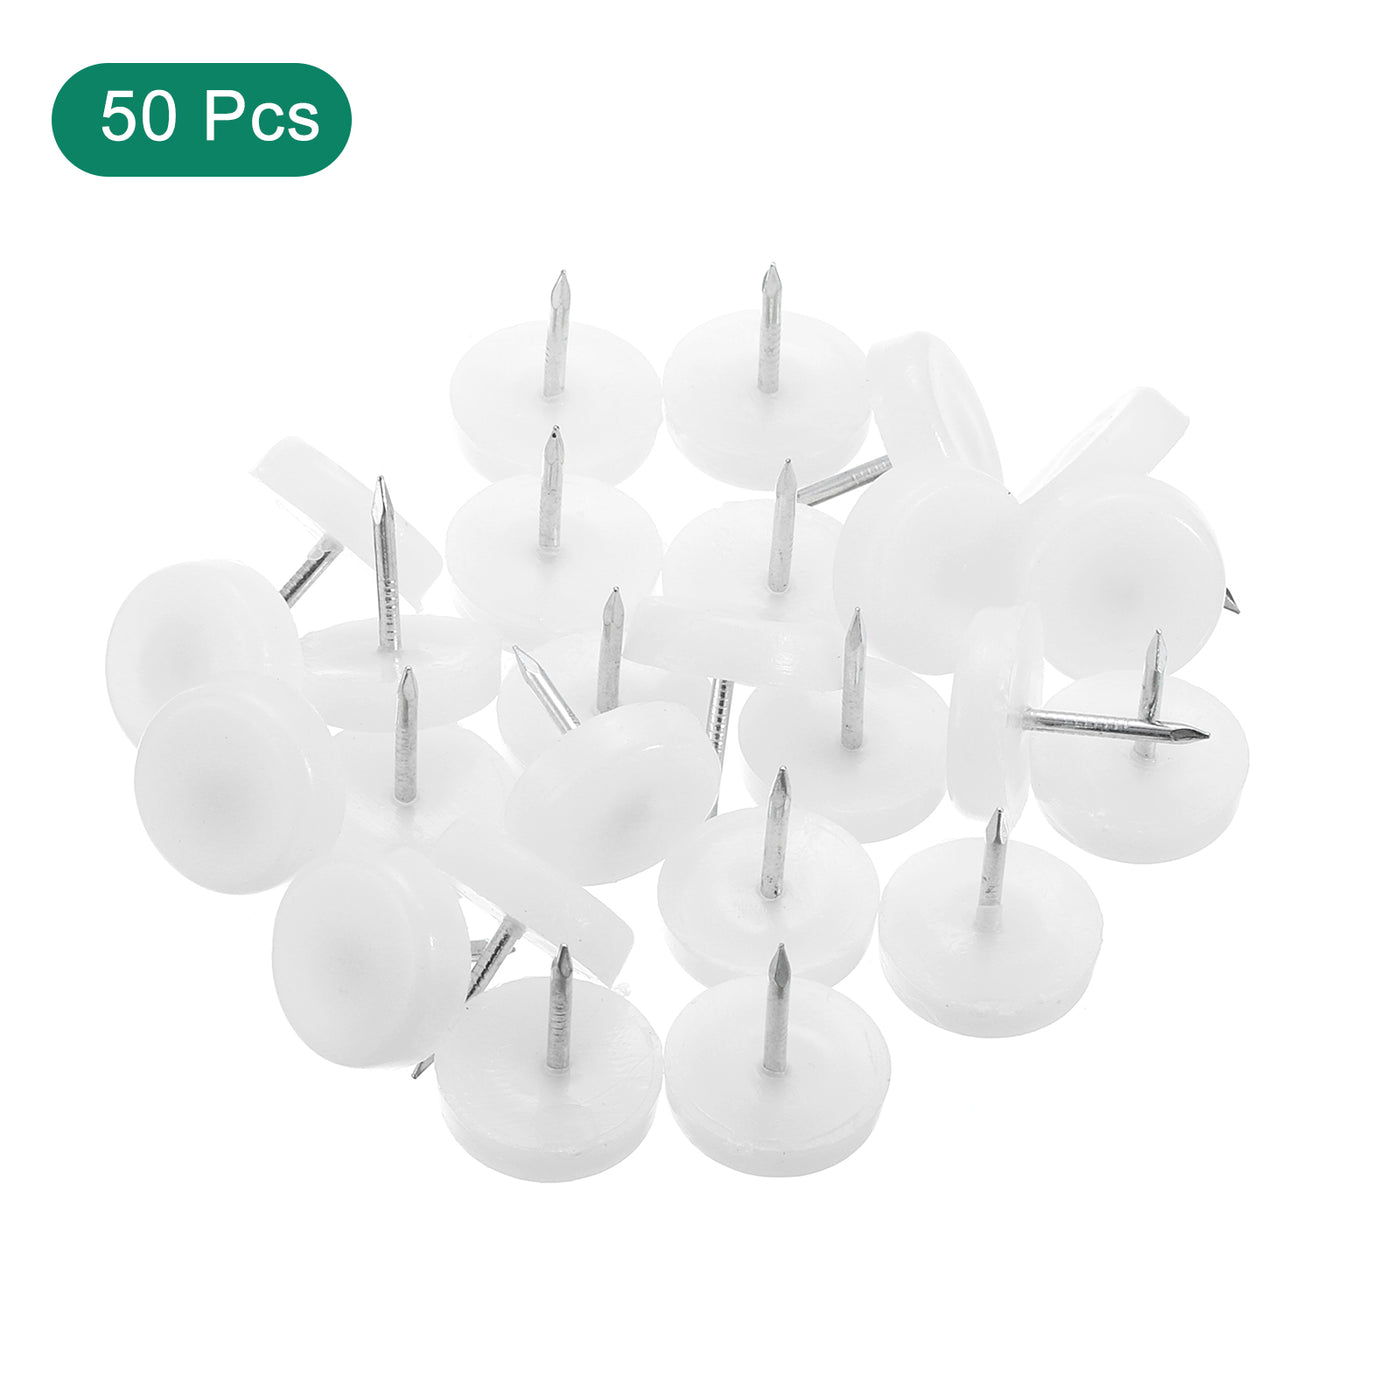 uxcell Uxcell Nail on Furniture Glides, 50pcs 19mm Plastic Furniture Feet Sliders, White